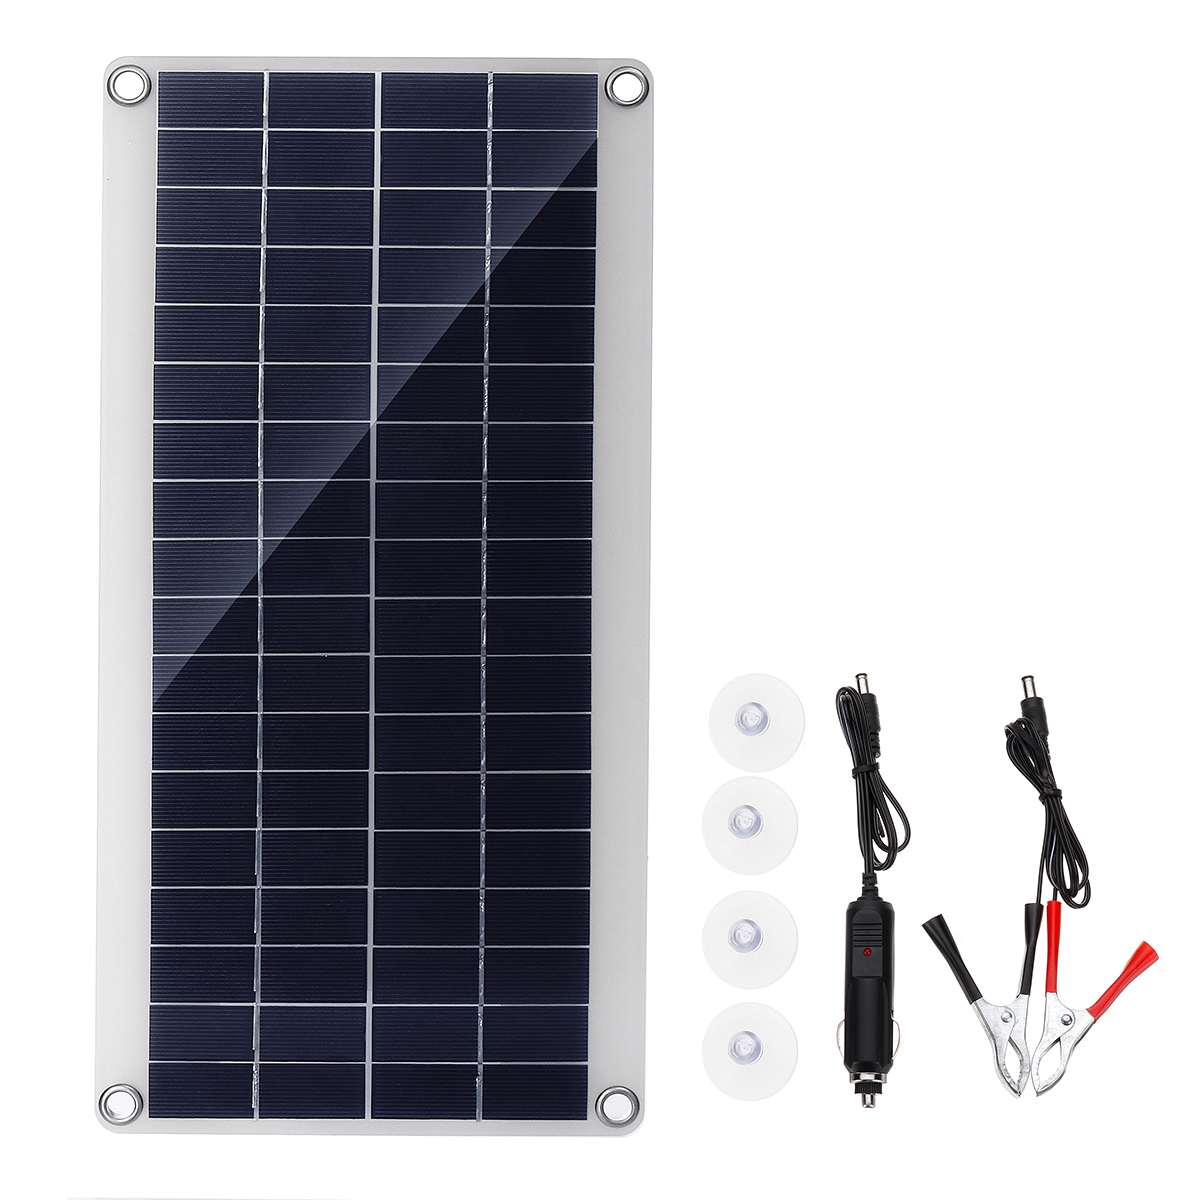 20W-Portable-Solar-Panel-Kit-DC-USB-Charging-Double-USB-Port-Suction-Cups-Camping-Traveling-1383681-2